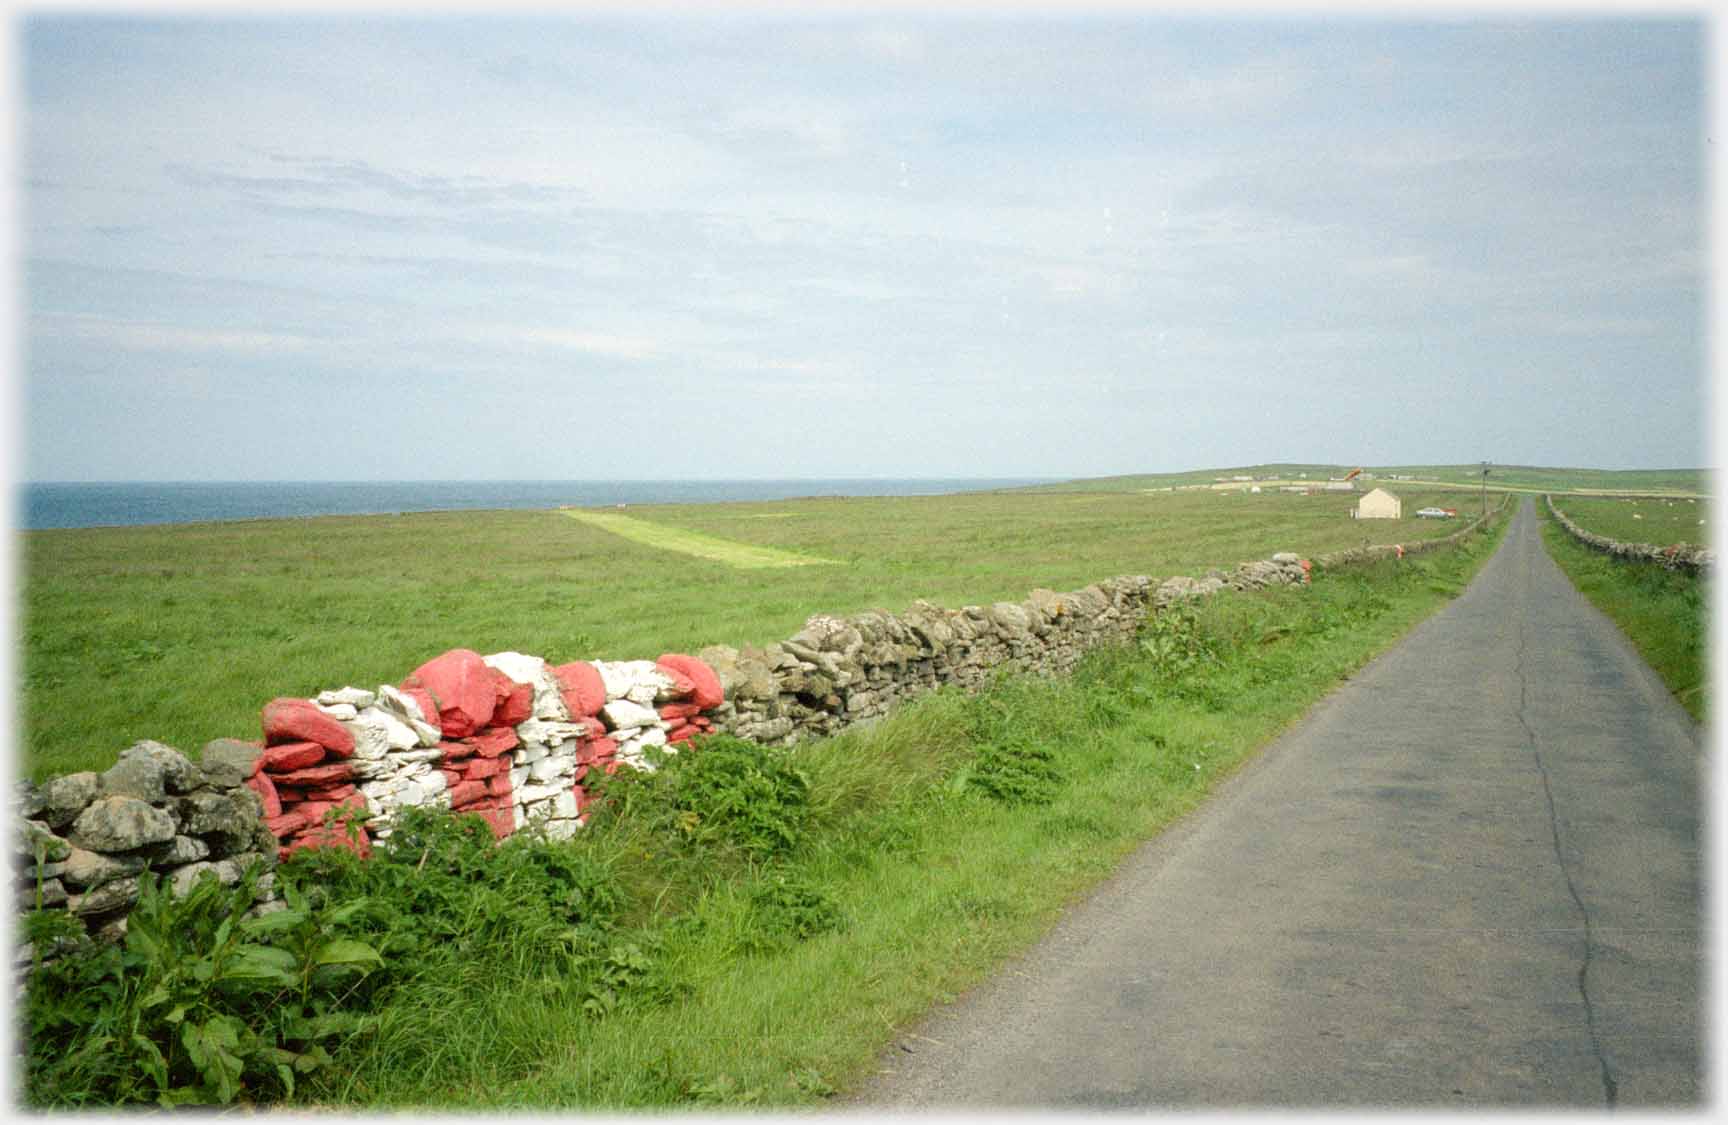 Fields by road with red and white strips on dividing dyke.